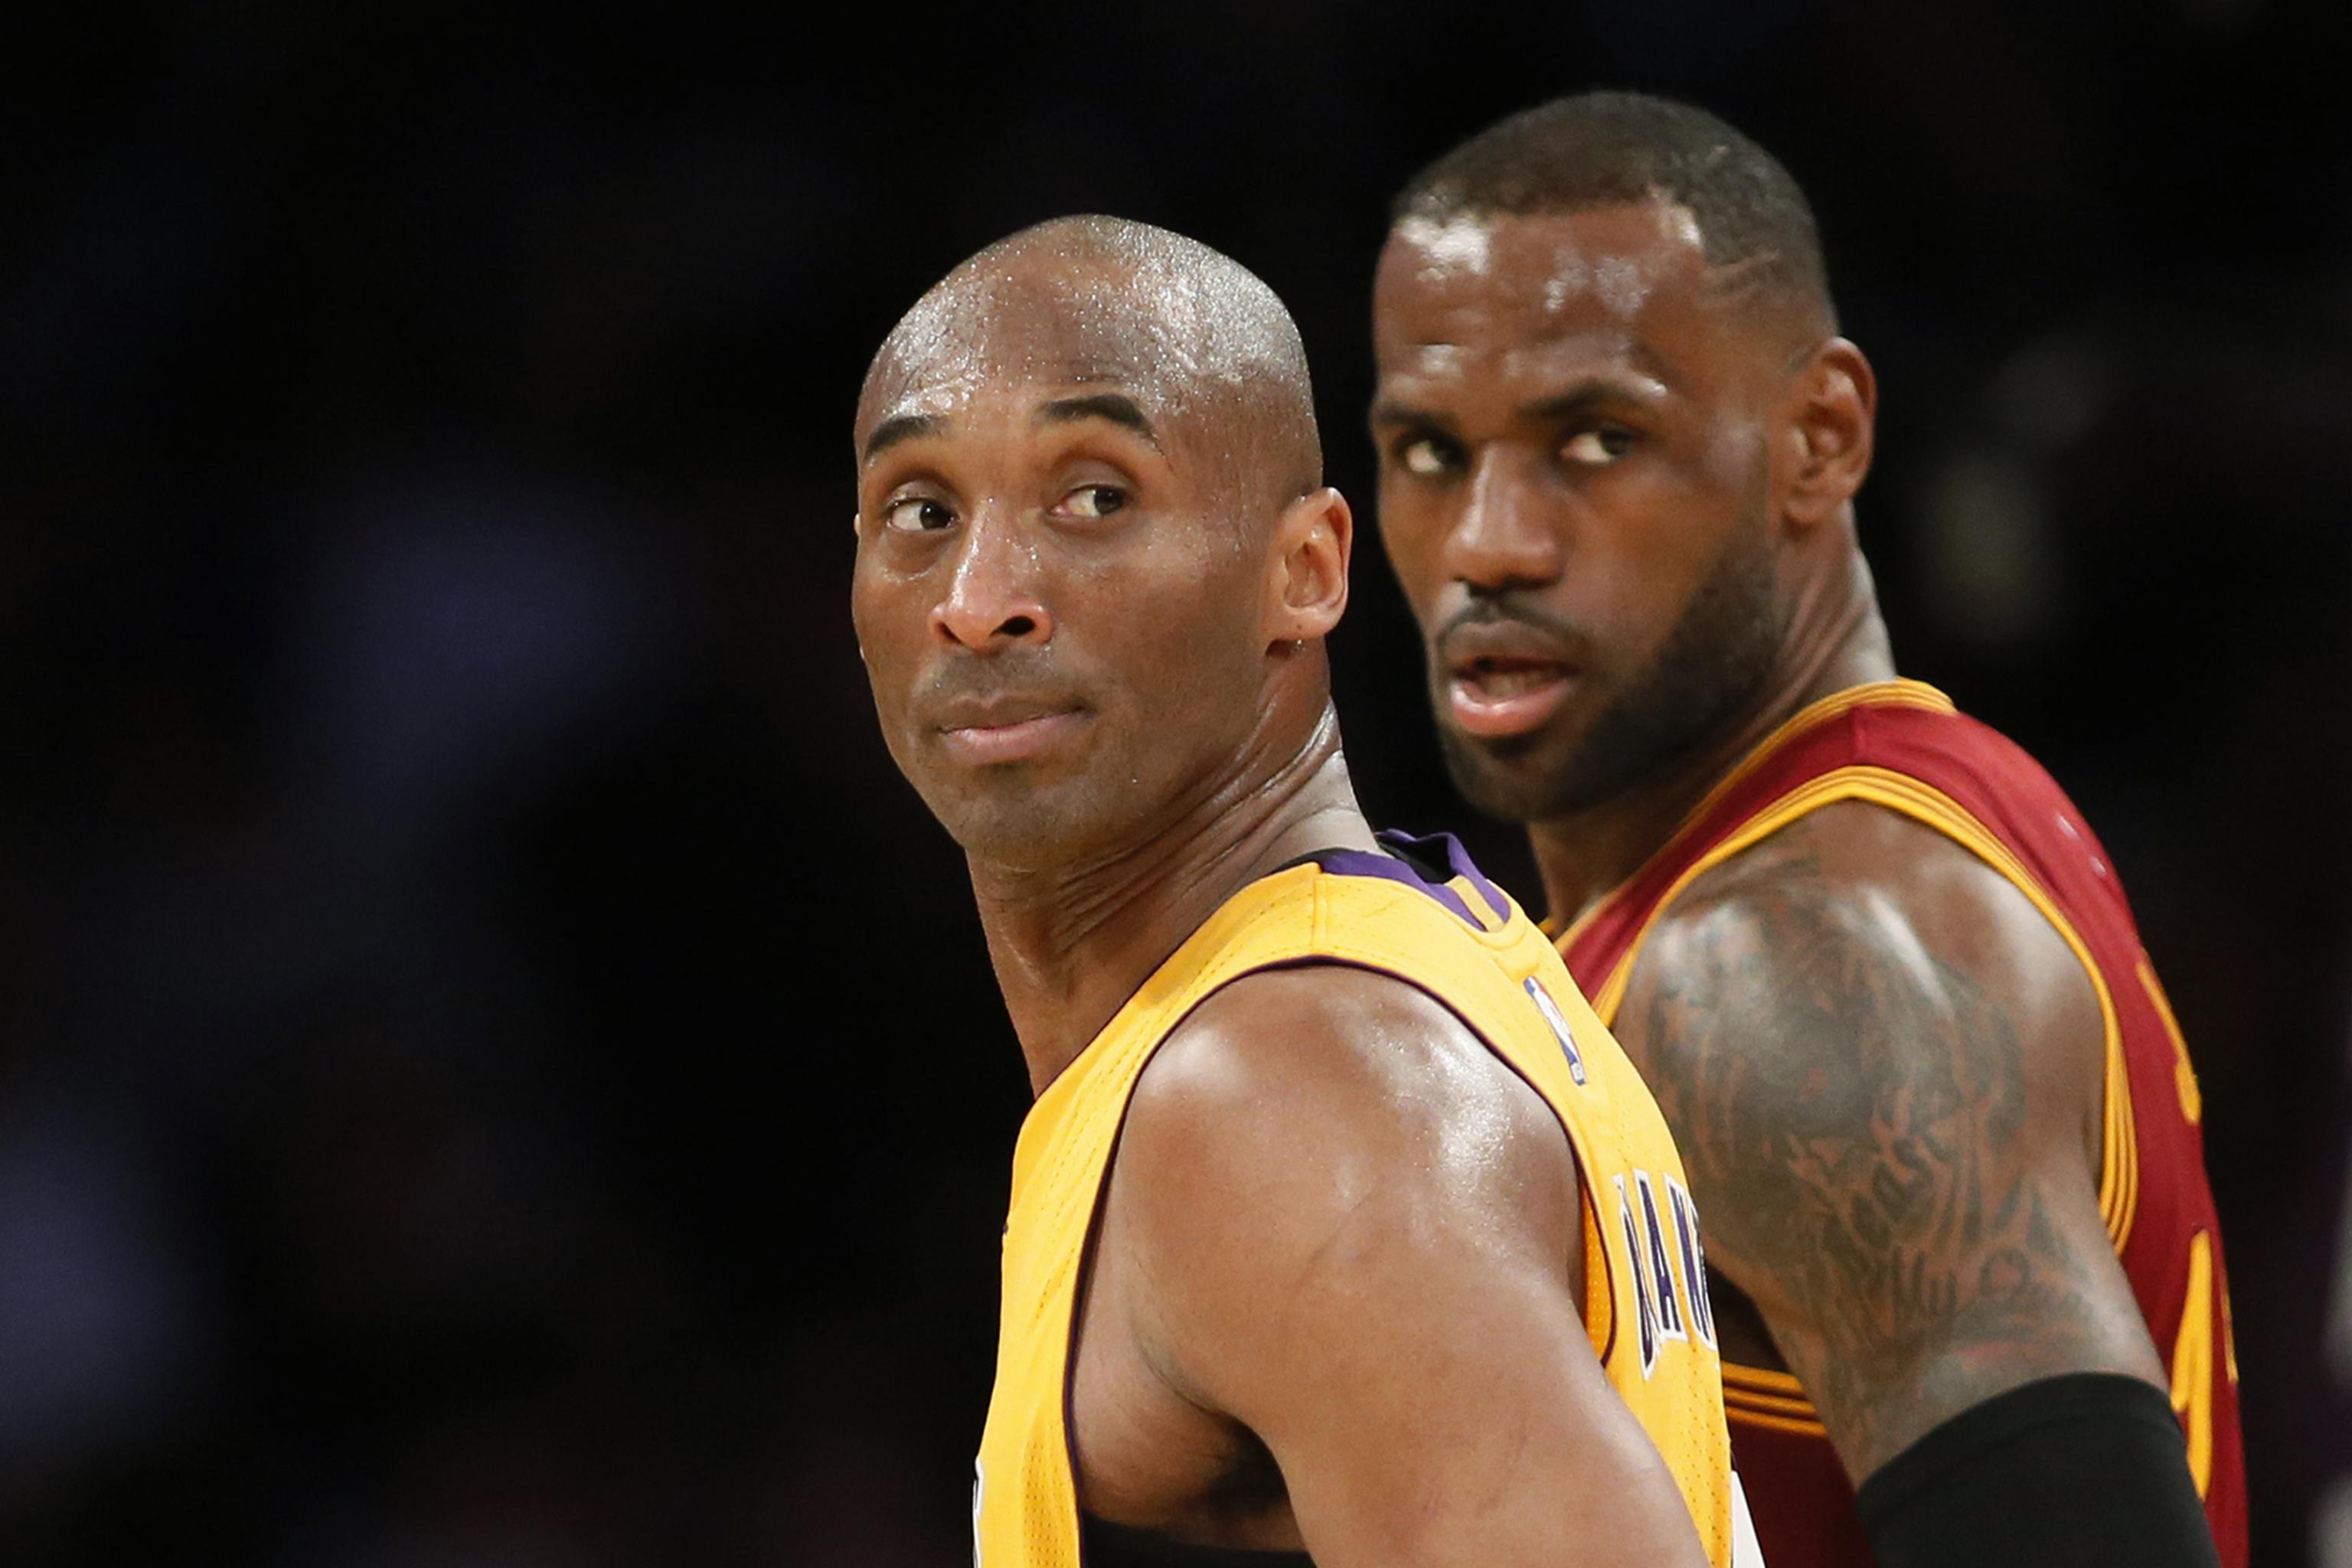 Are the 76ers considering retiring Kobe Bryant's number?